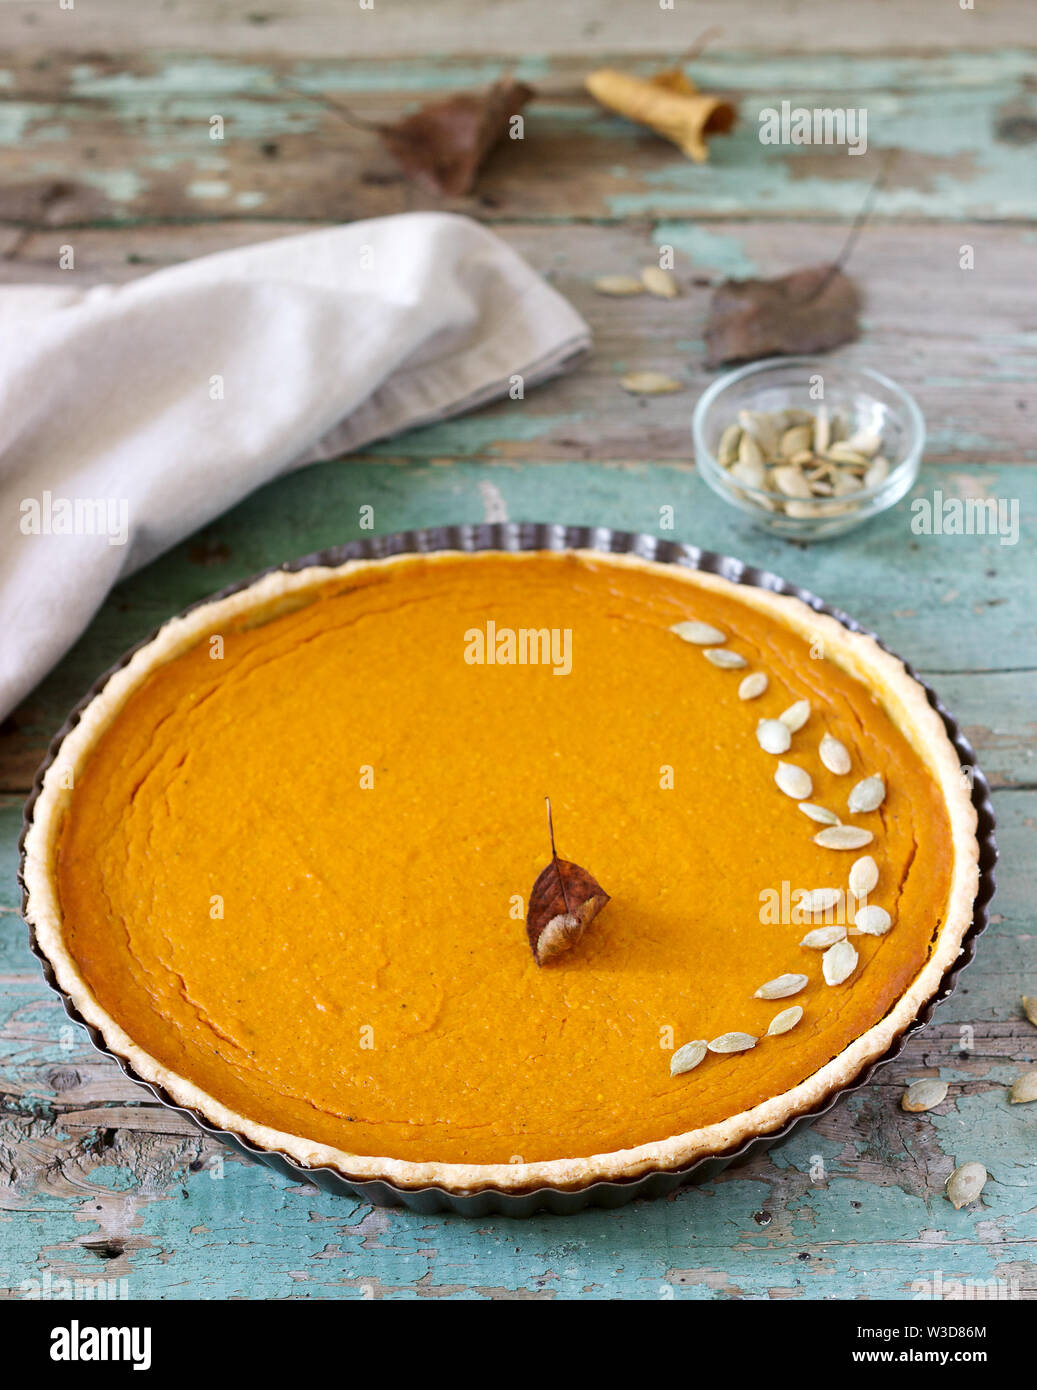 Traditional American pumpkin pie for Thanksgiving Day or Halloween on a wooden background. Rustic style. Stock Photo